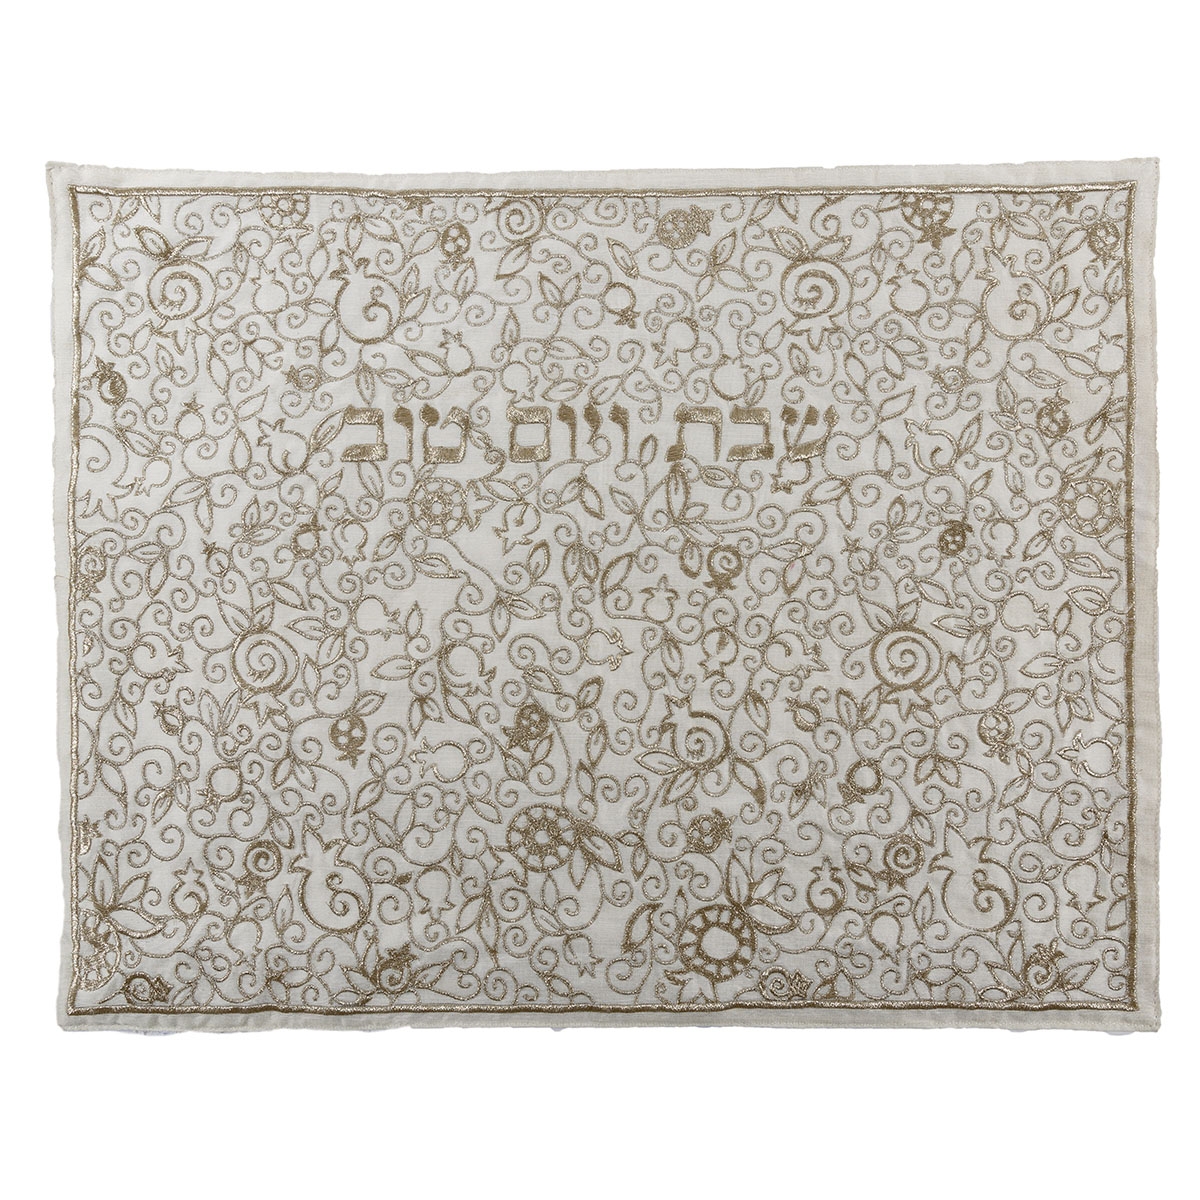 Yair Emanuel Embroidered Pomegranate Challah Cover – Gold  - 1